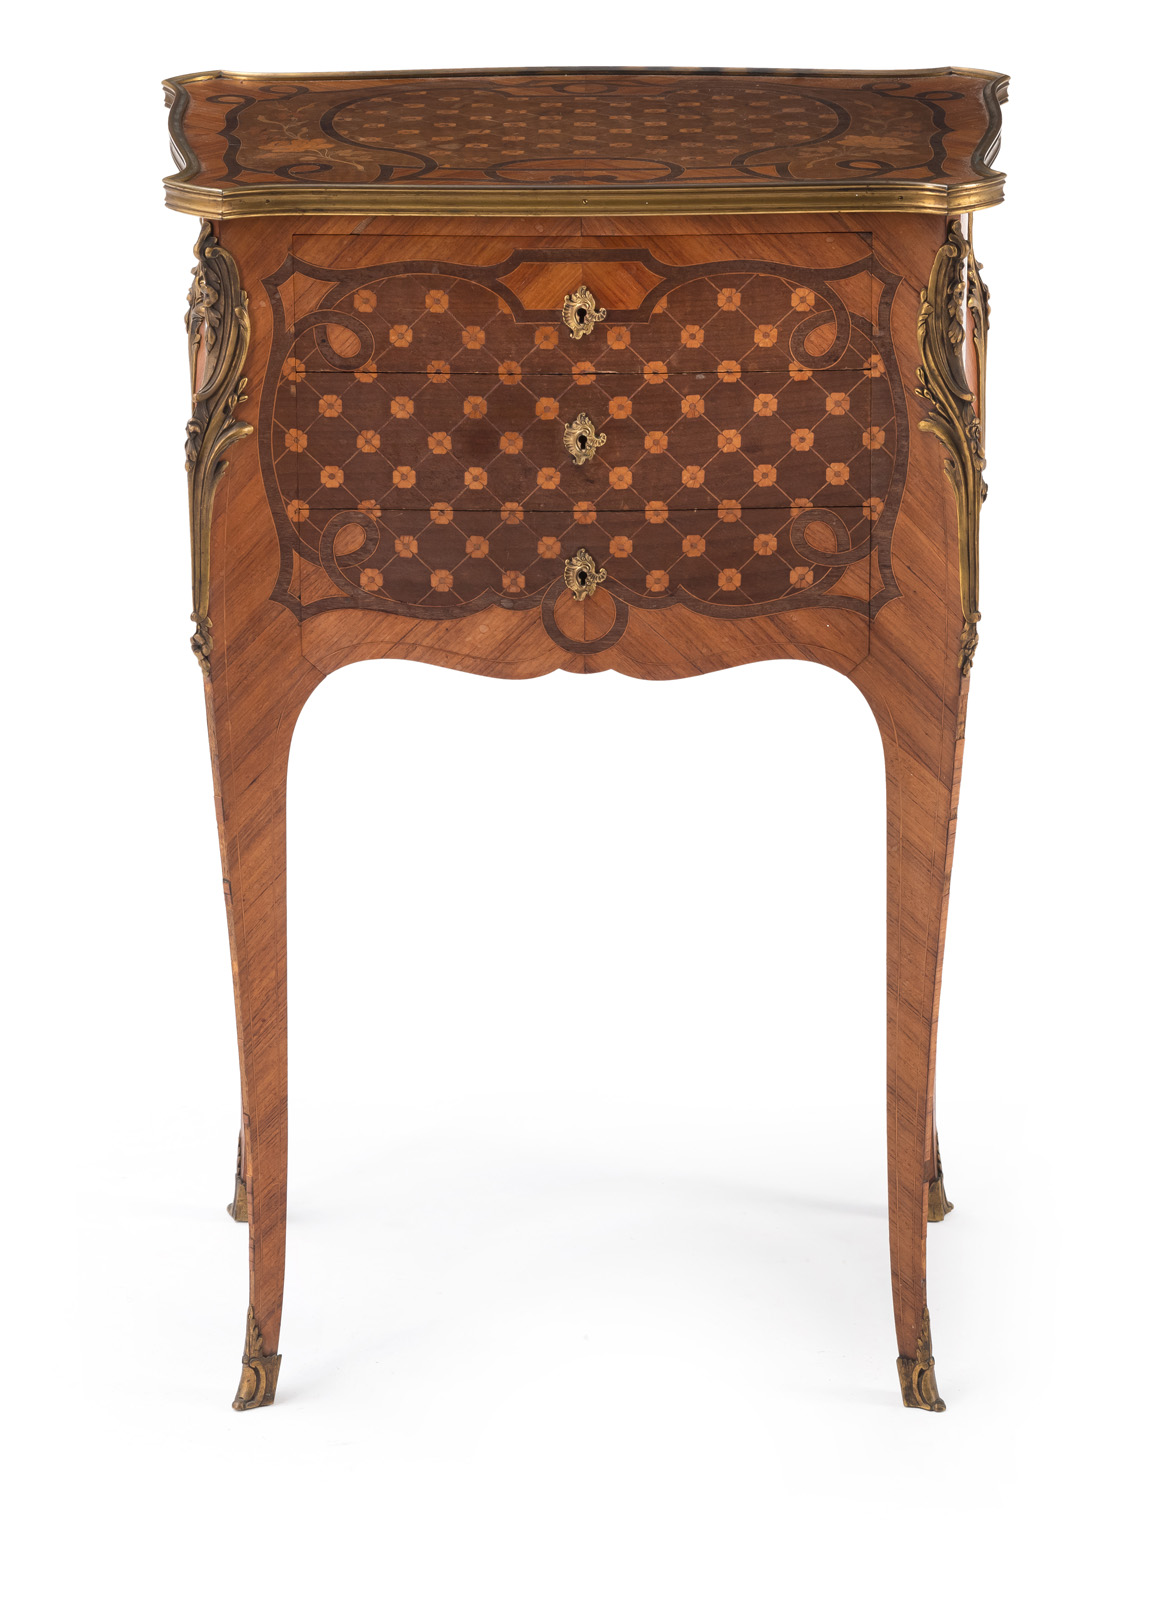 A LOUIS VI STYLE BRONZE MOUNTED PARTIAL EBONIZED KINGWOOD MARQUETRIED OCCASIONAL COMMODE - Image 3 of 7